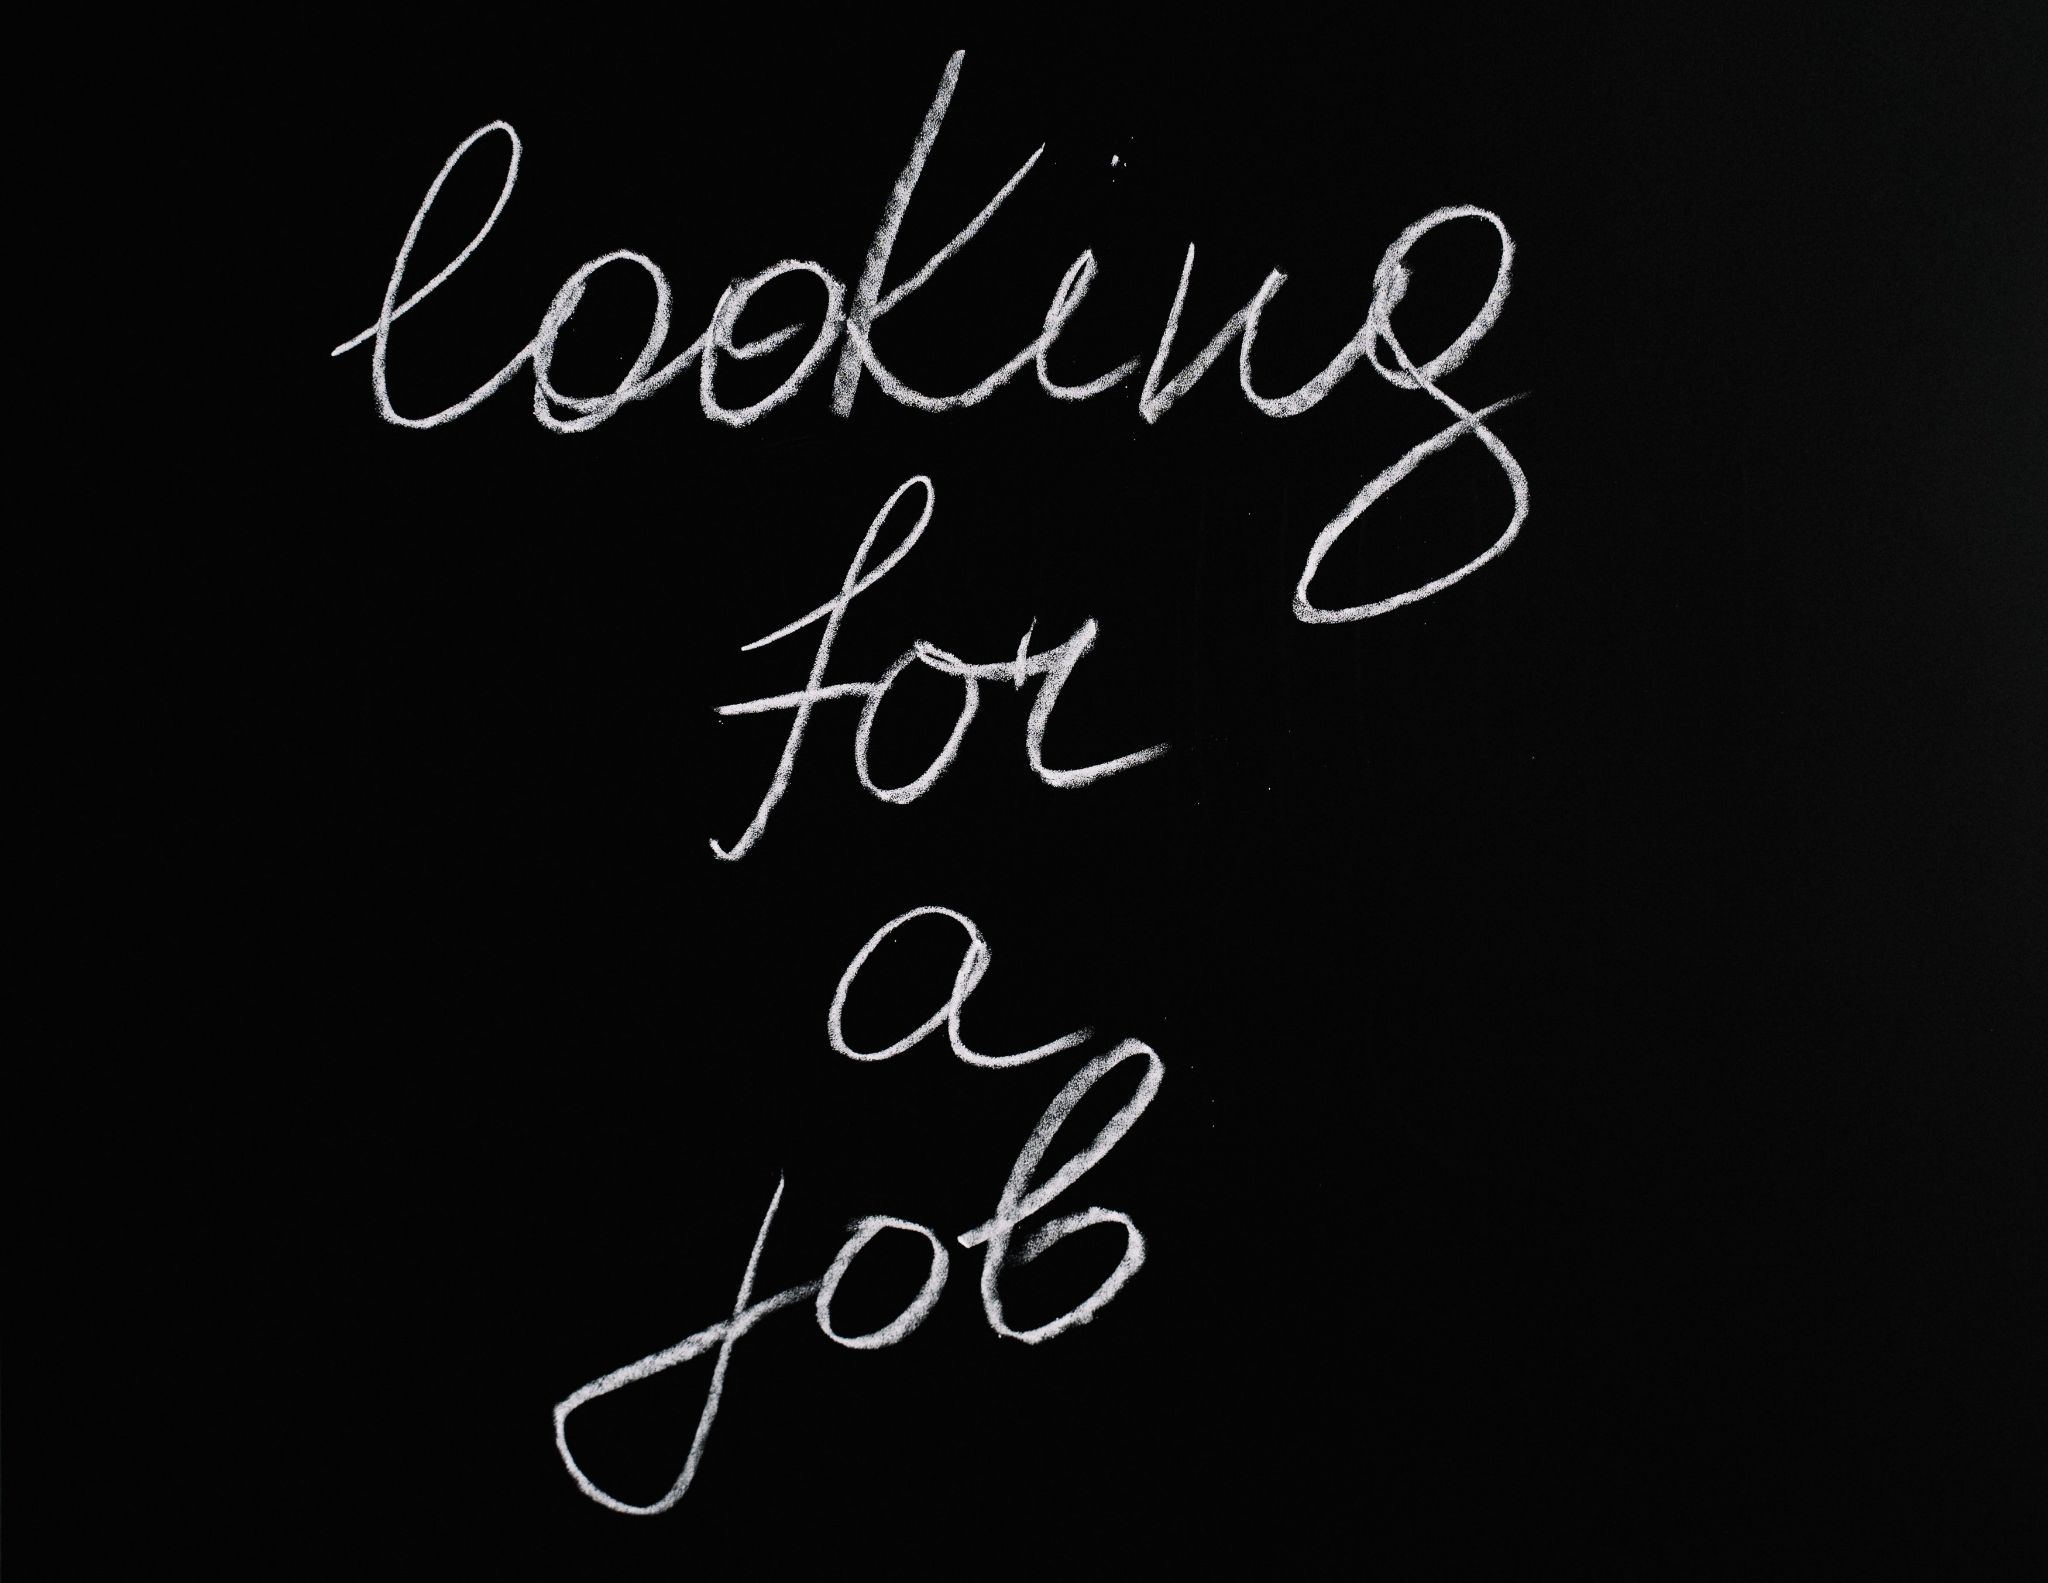 “Looking For A Job” Written On A Black Background